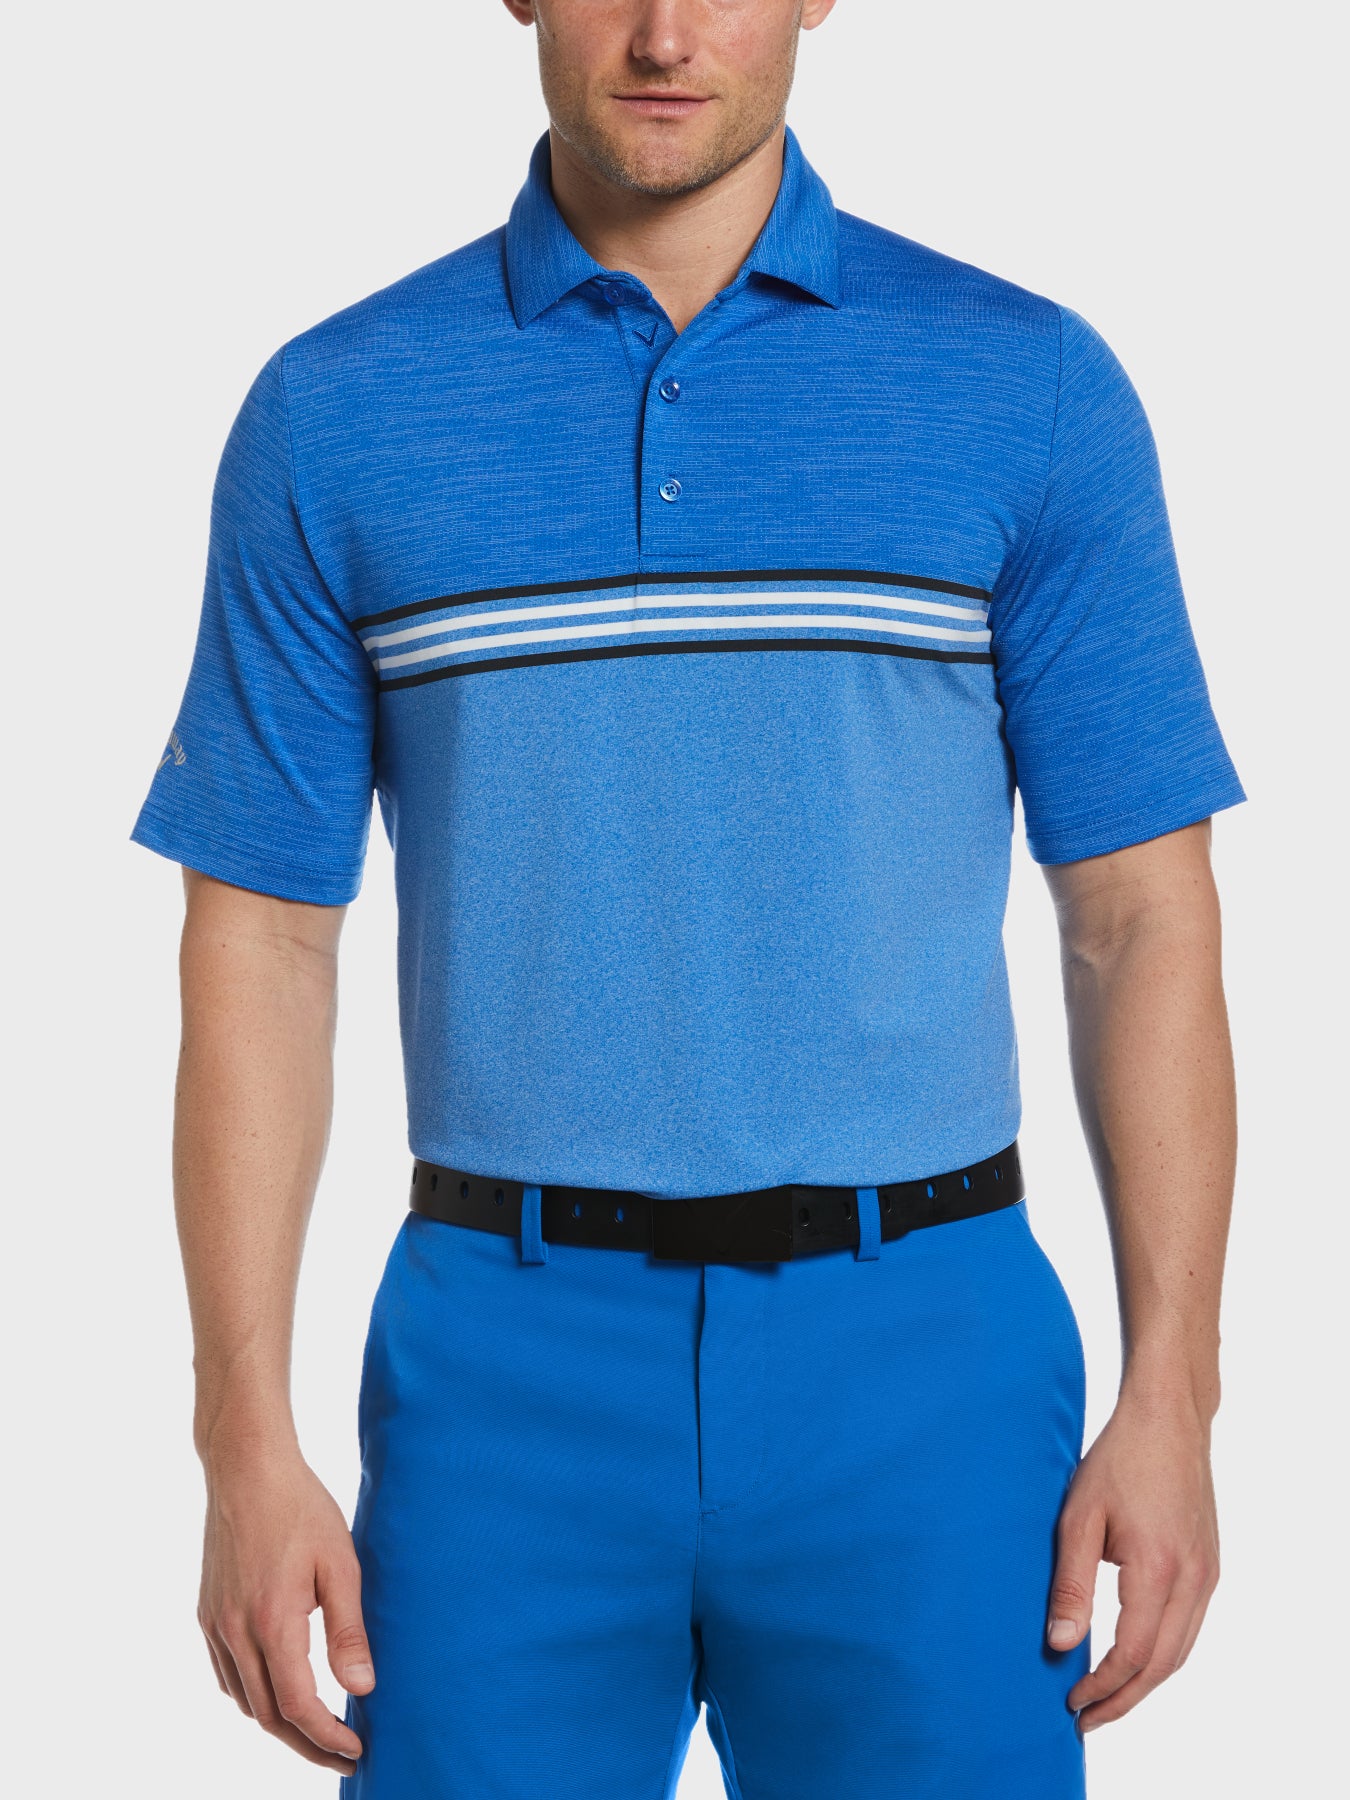 View Heathered Chest Stripe Polo In Magnetic Heather Magnetic Htr XL information